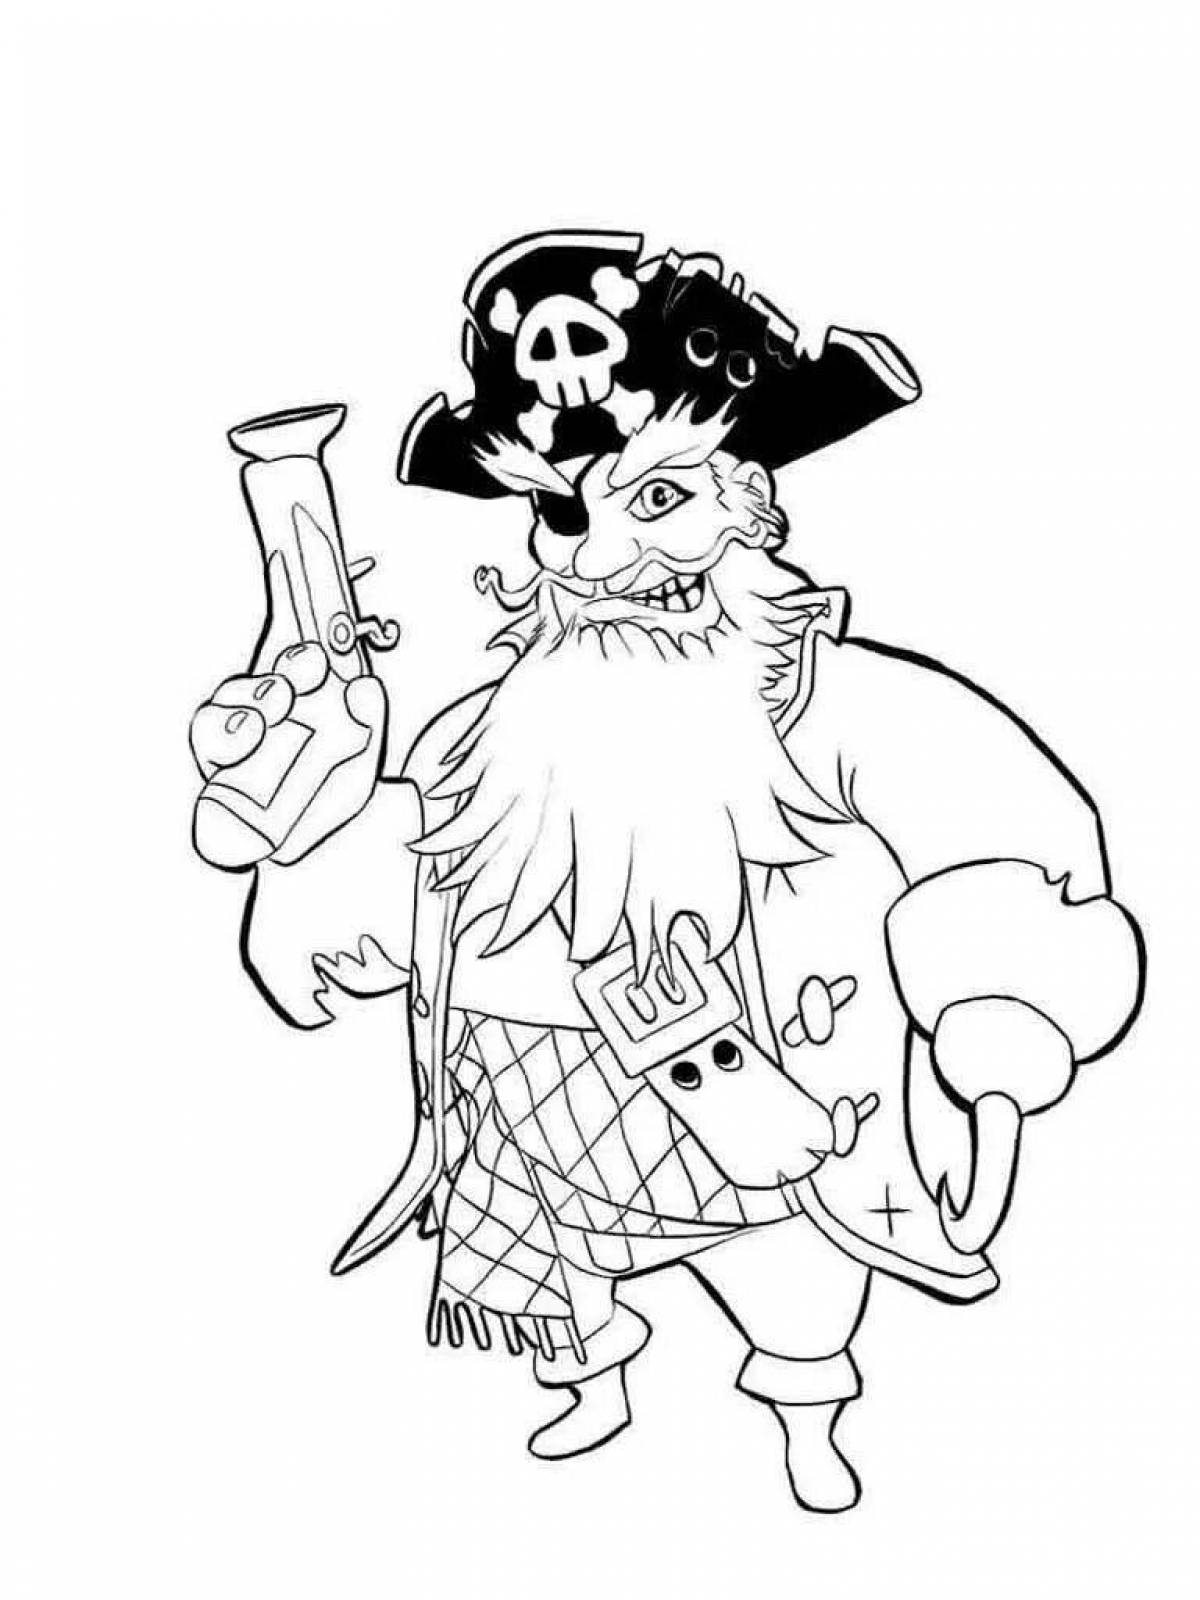 Great pirate coloring book